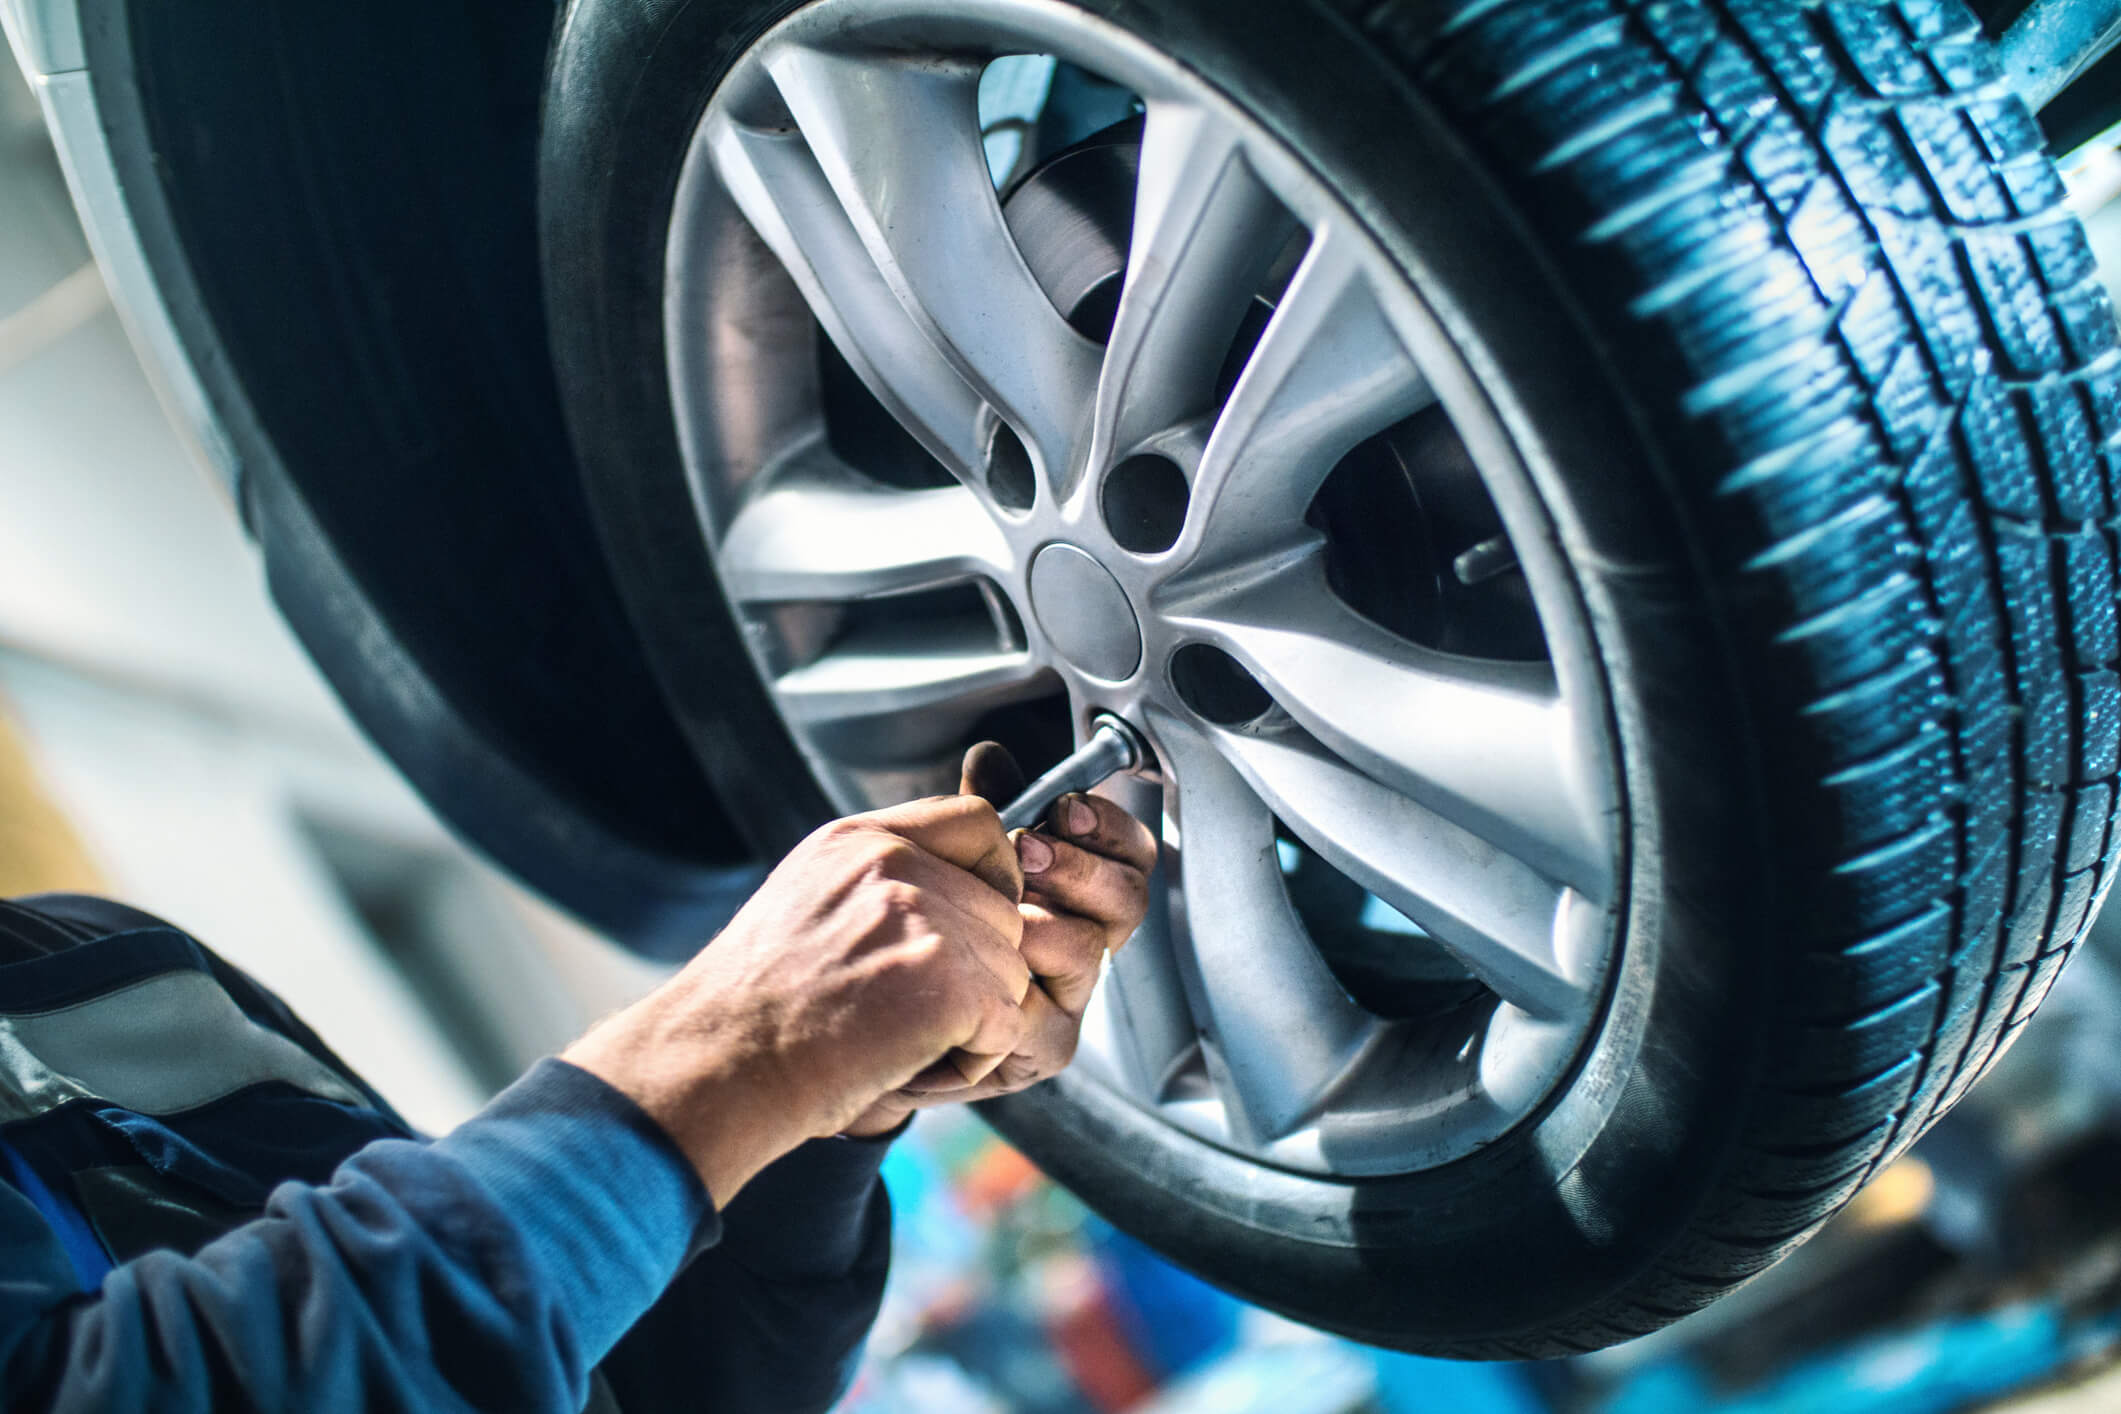 How Do You Know When You Need Tire Repair or Replacement?